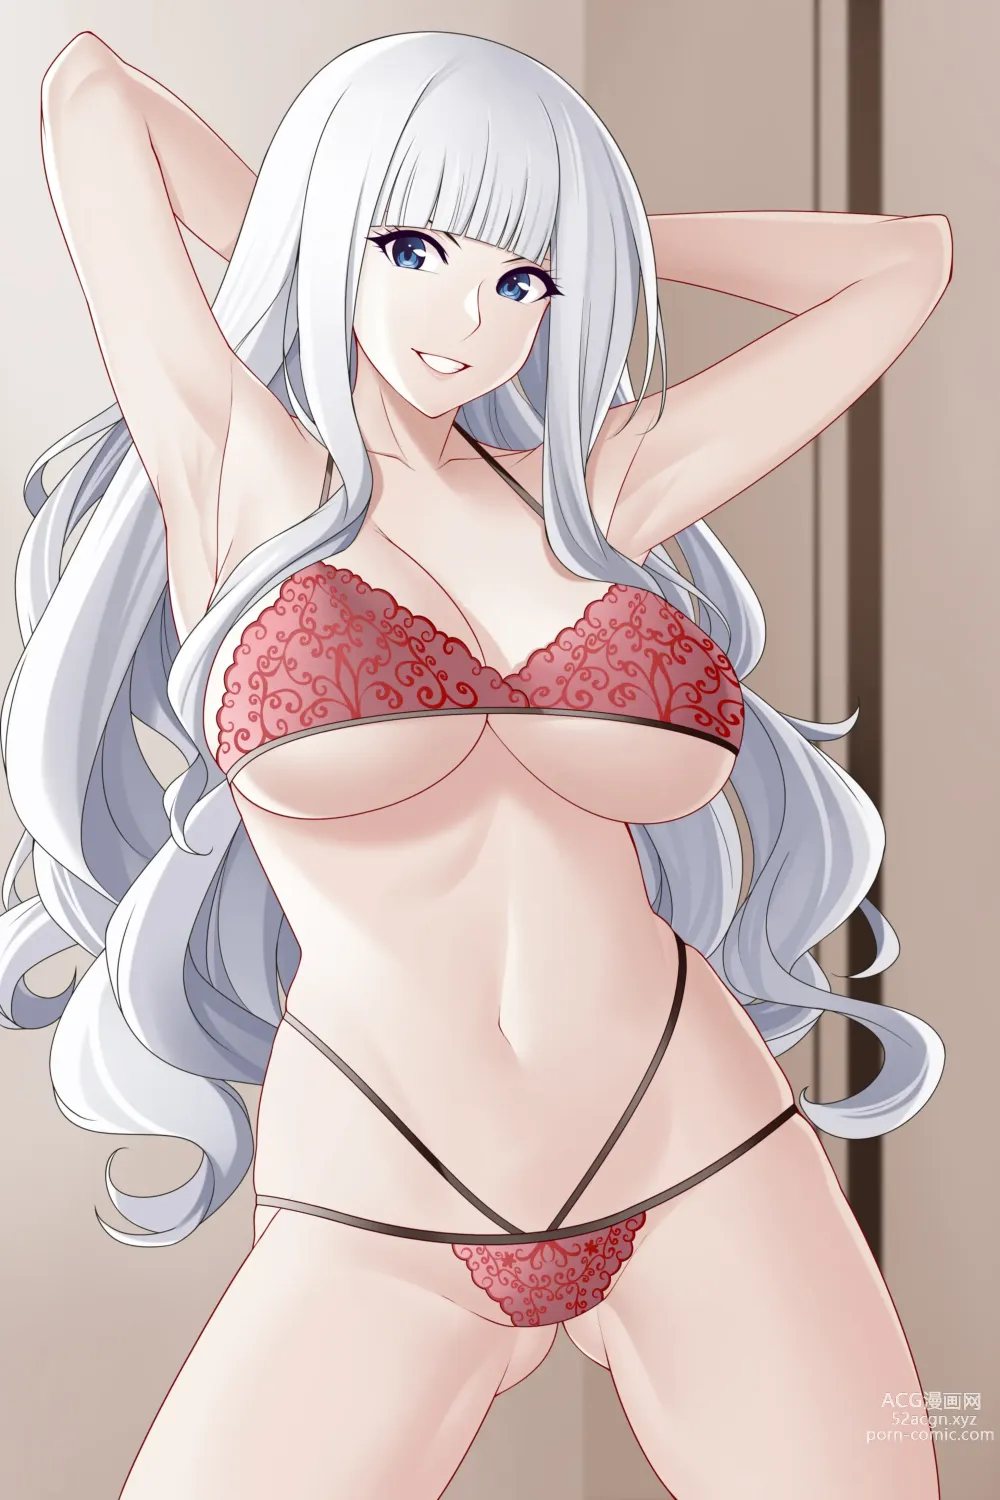 Page 5 of imageset Fairy Tail girls sexy lingerie